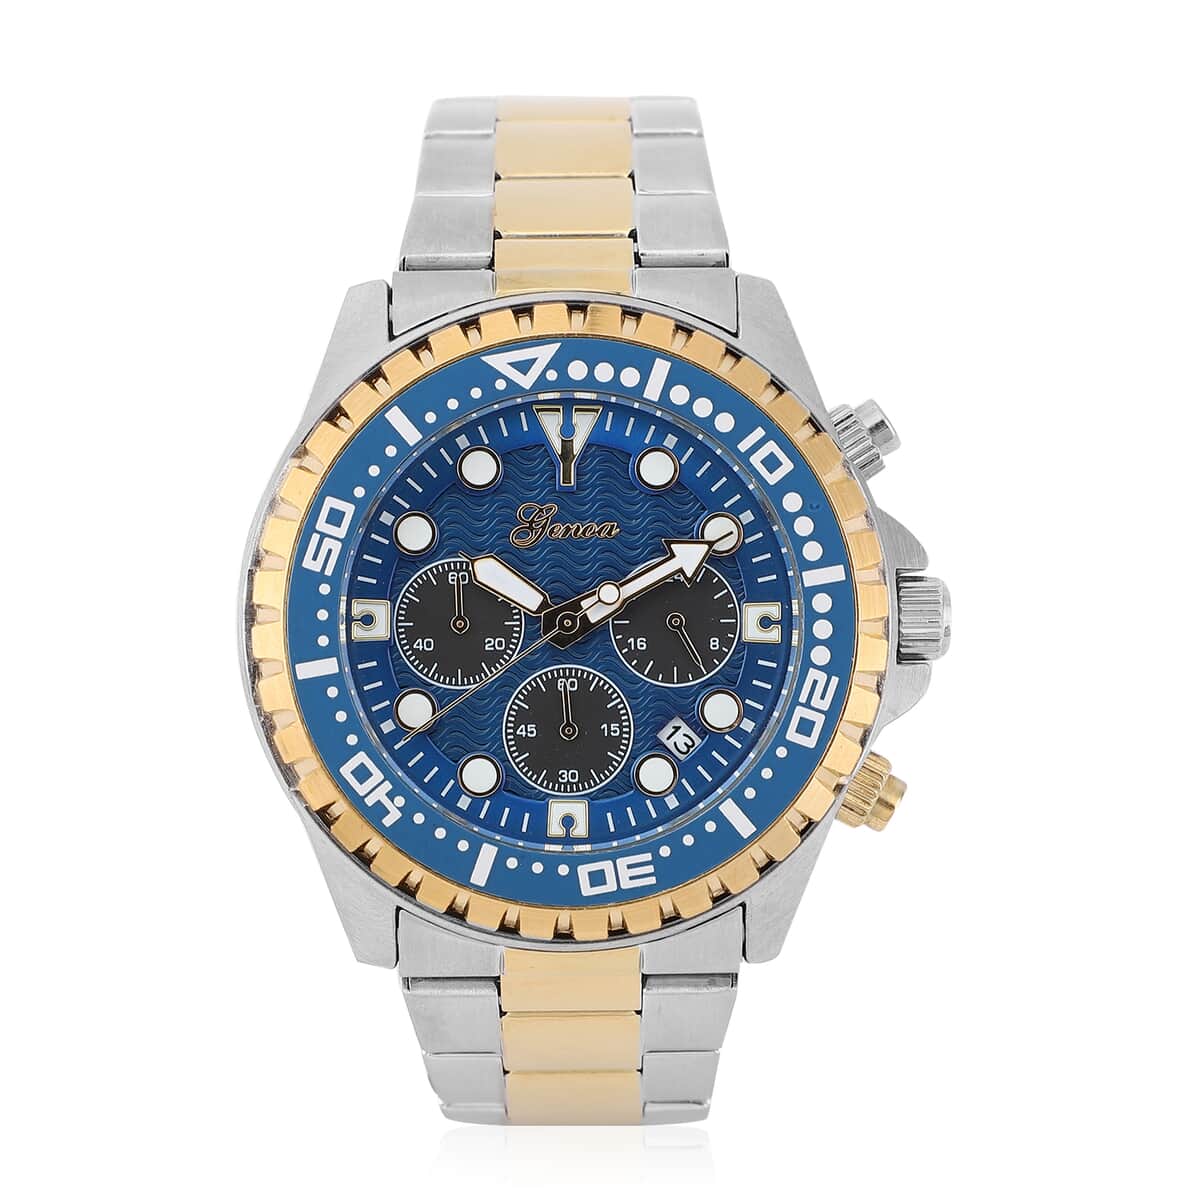 Genoa Multi-functional Quartz Movement Watch with Blue Dial & Stainless Steel Strap (46 mm) image number 0